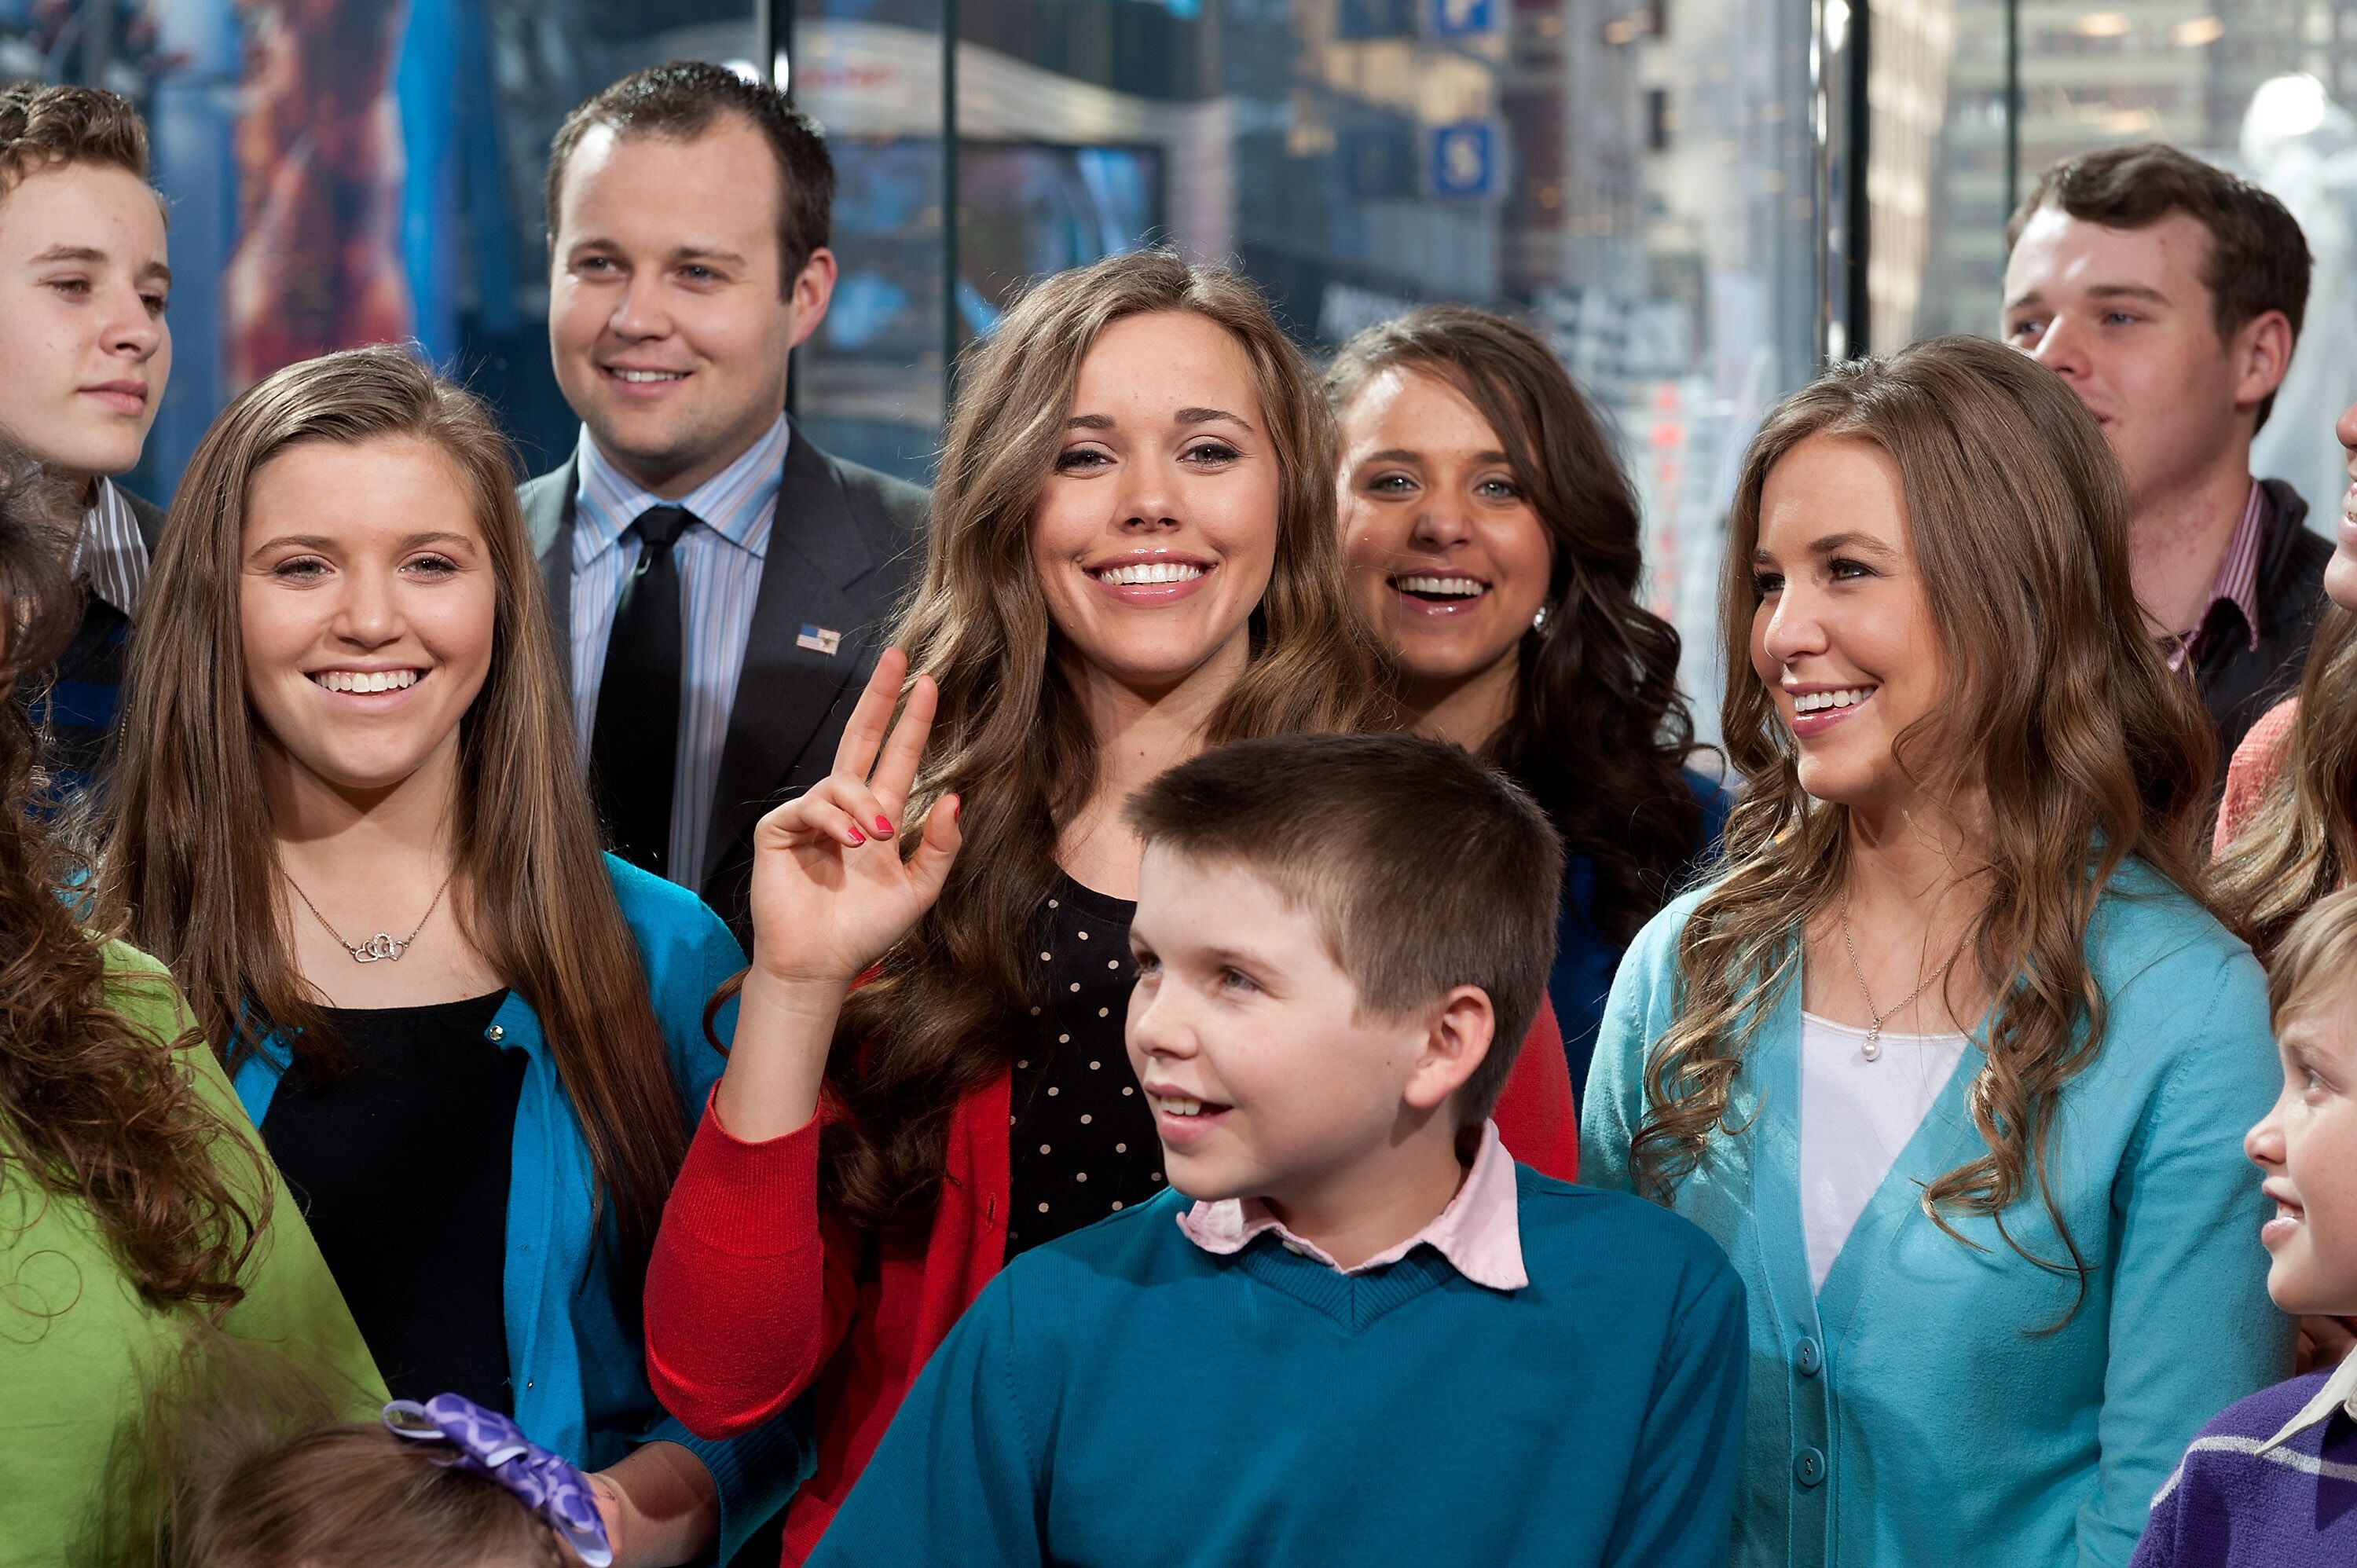 The Duggar family visits "Extra" at their New York studios at H&M in Times Square on March 11, 2014 in New York City | Photo: Getty Images